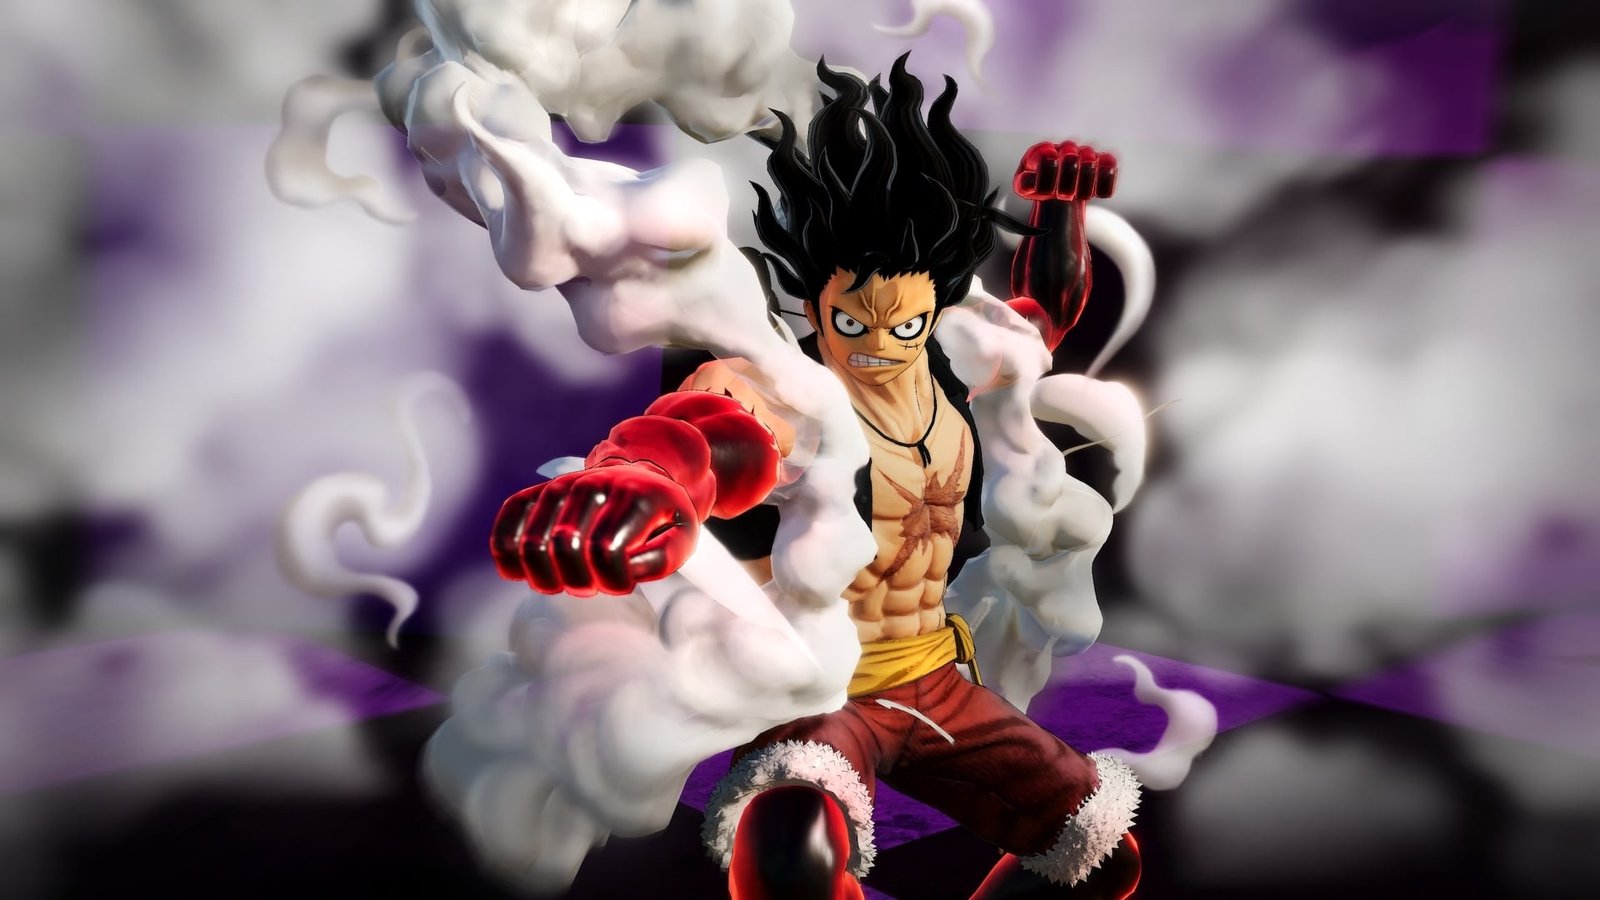 Review – One Piece: Pirate Warriors 4